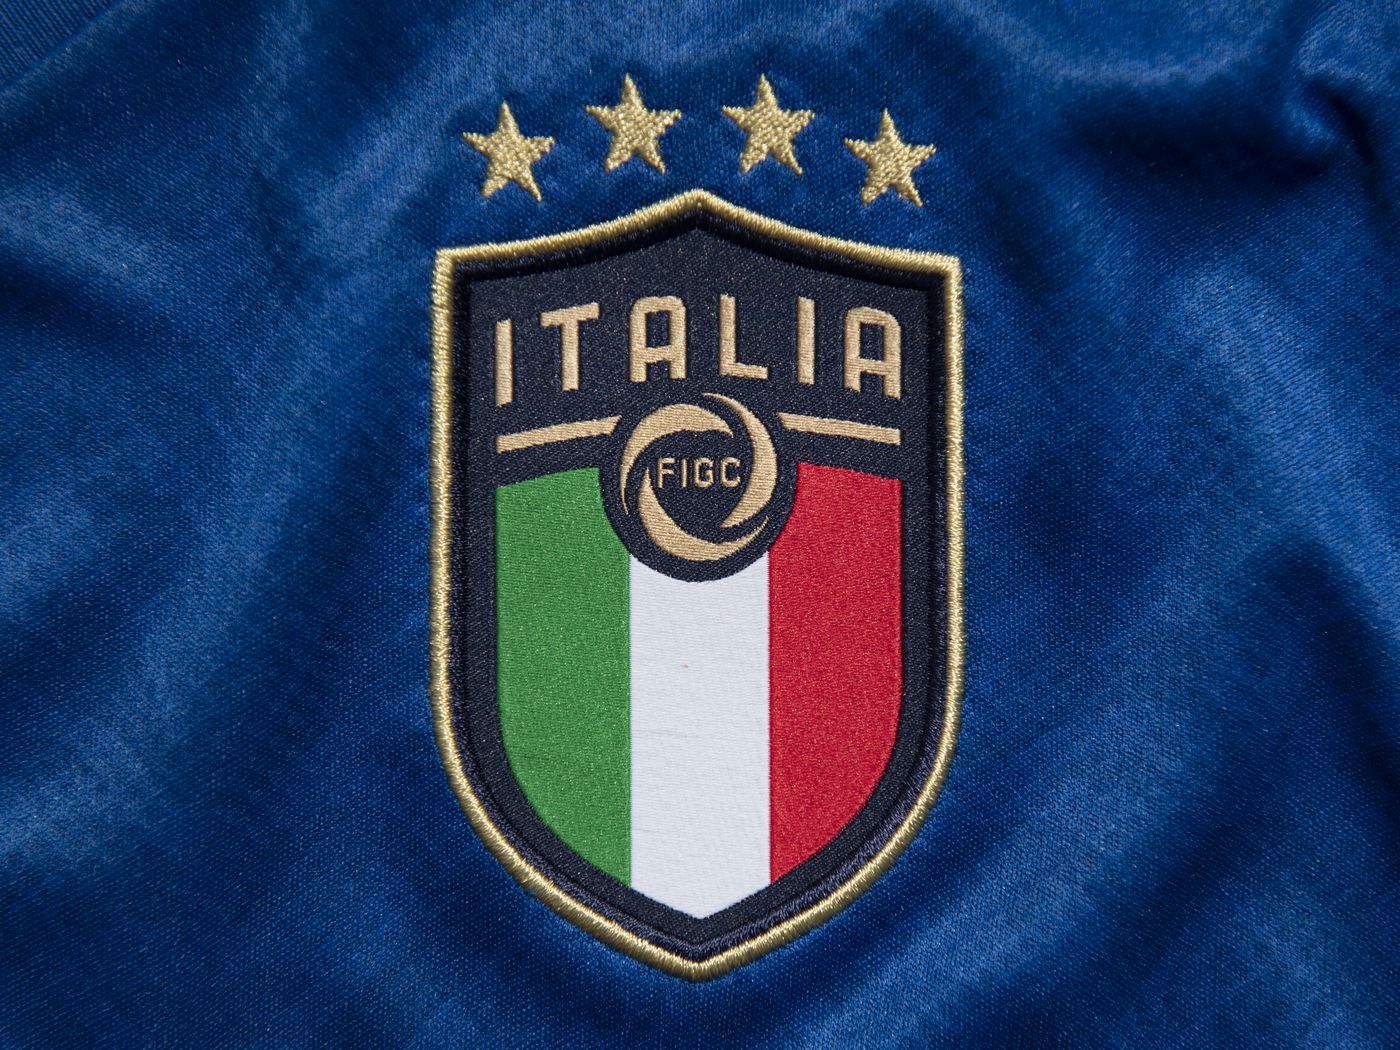 FIGC Wallpapers - Wallpaper Cave